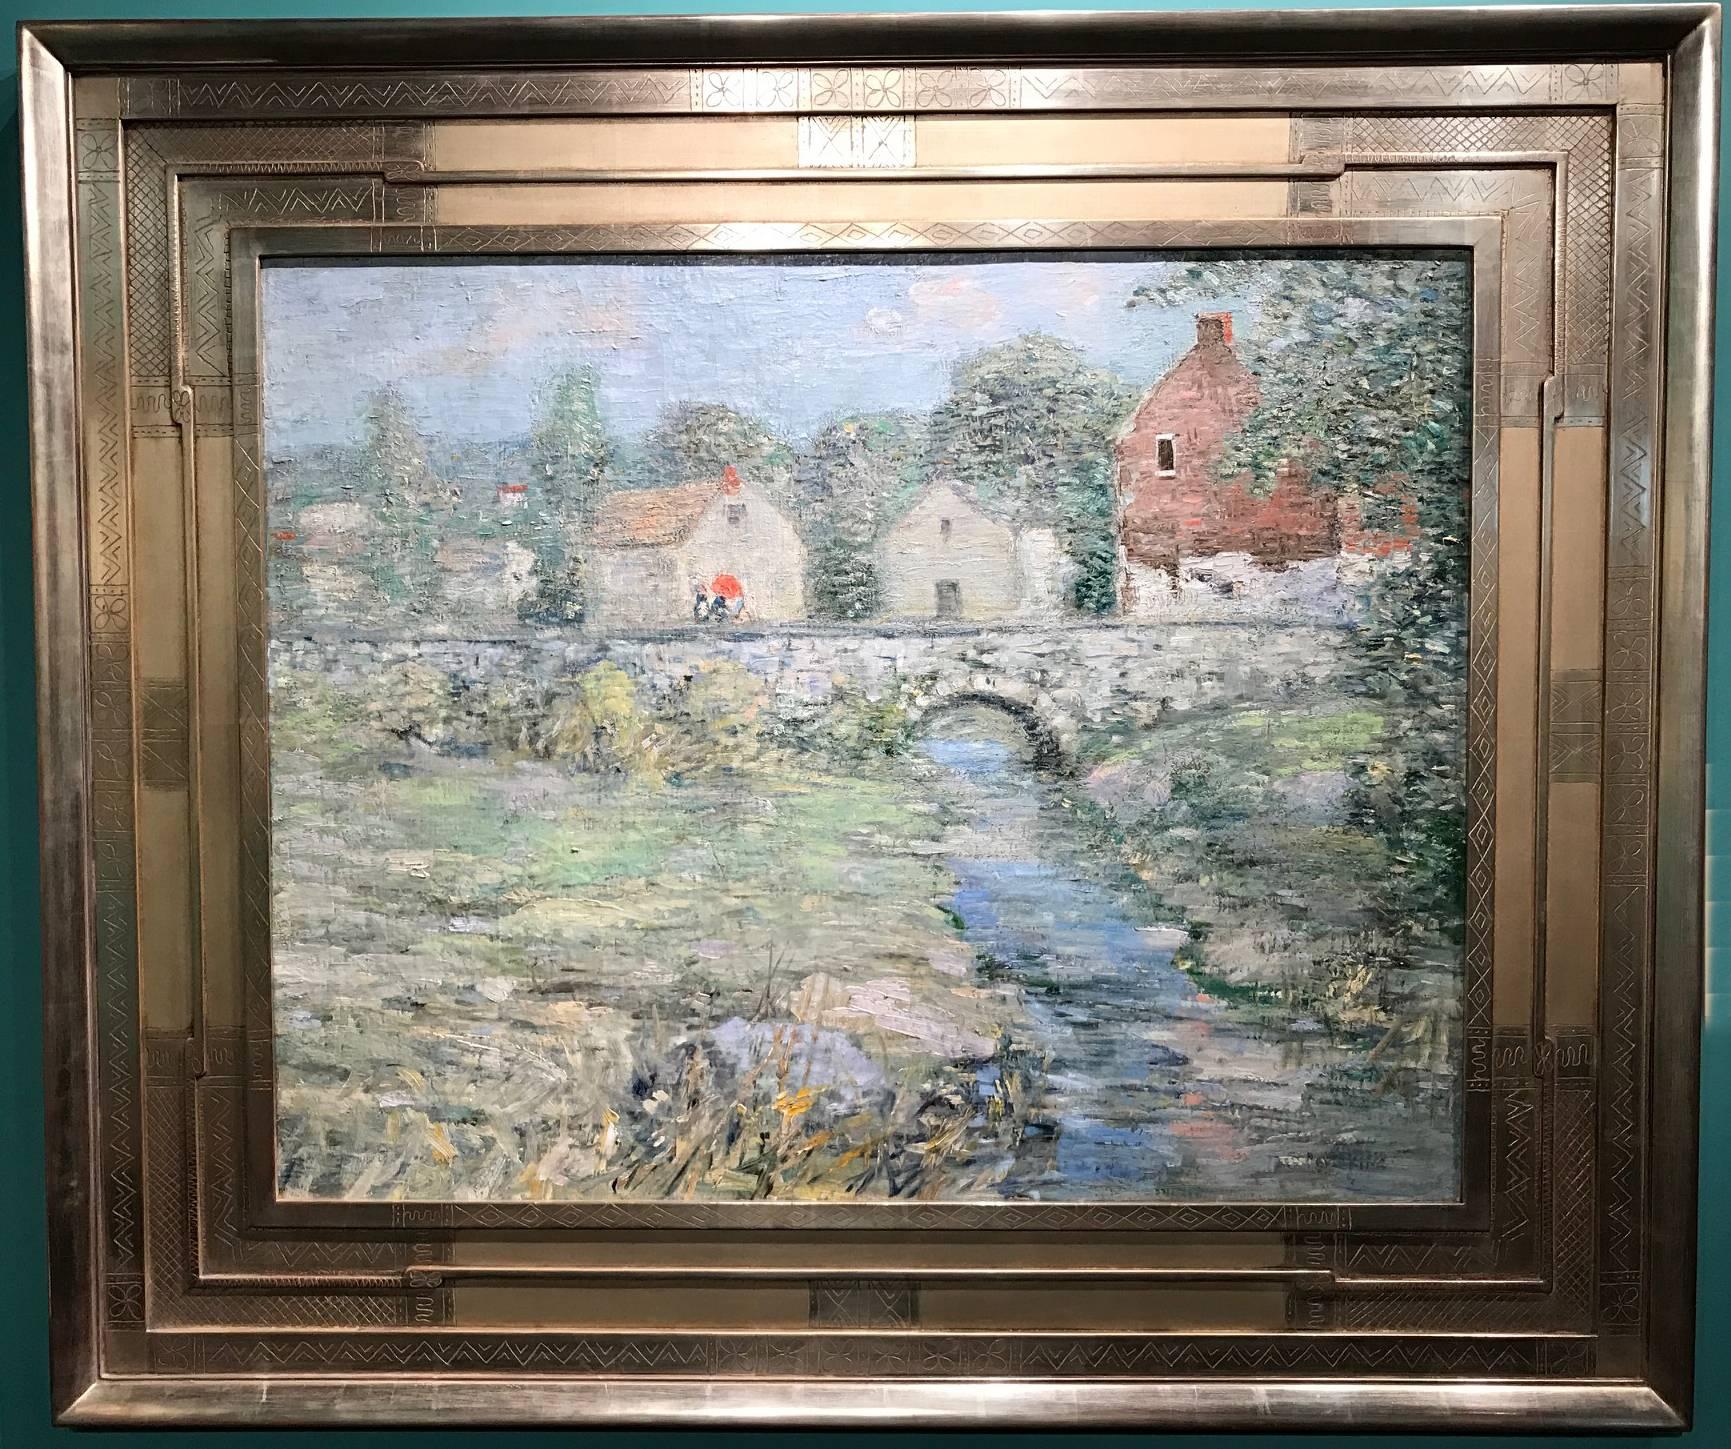 This wonderful impressionist country village landscape painting with a stone bridge was done by American artist Paul Bernard King (1867-1947). King was born in Buffalo, New York, and after becoming an established printer, went on to study at the NY